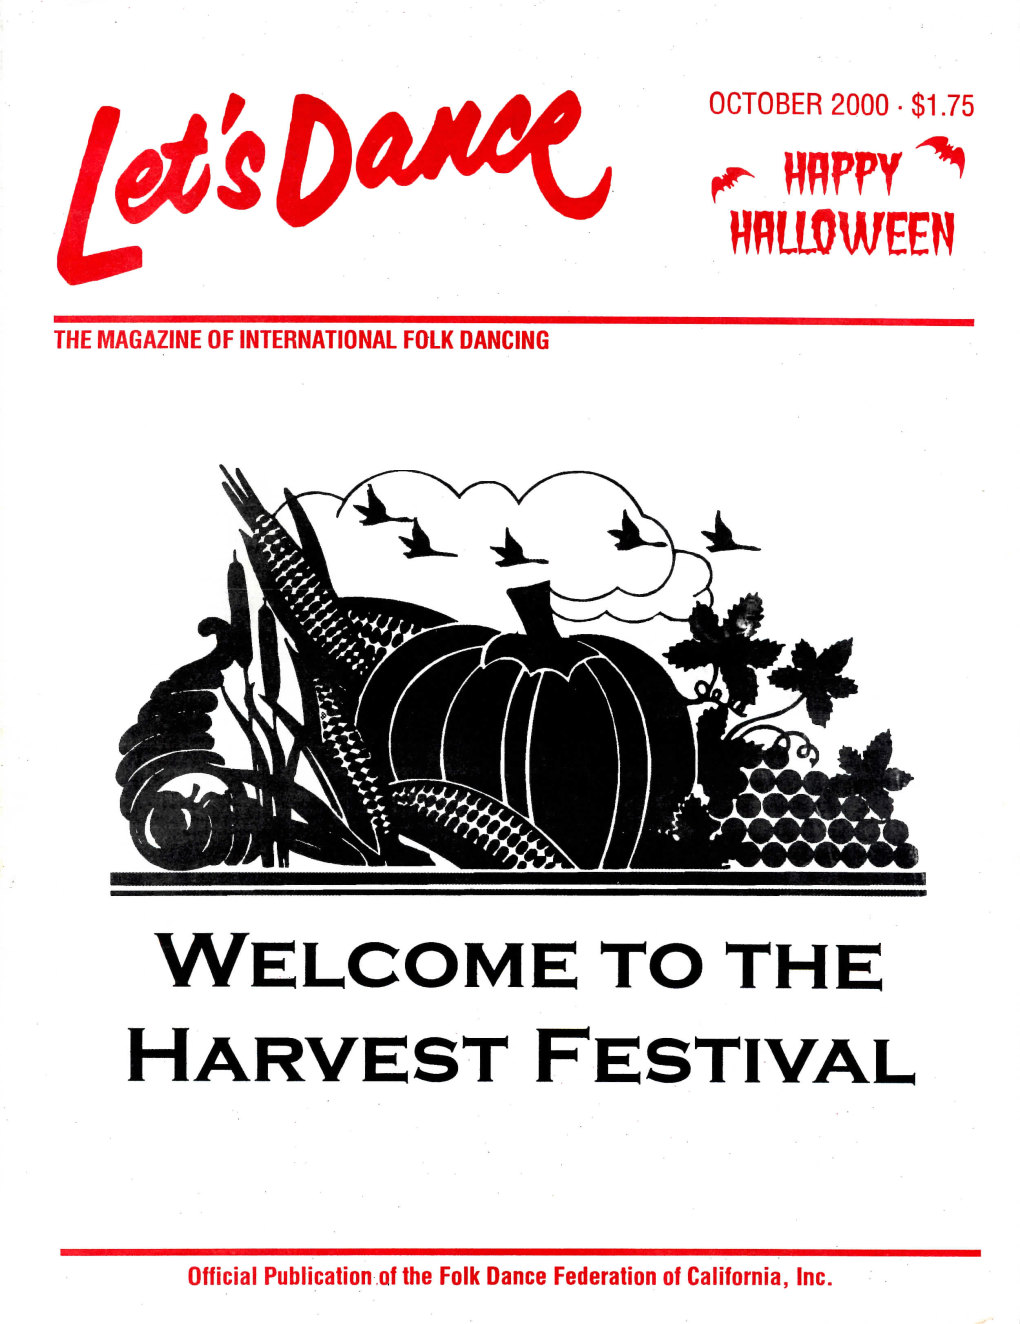 Welcome to the Harvest Festival